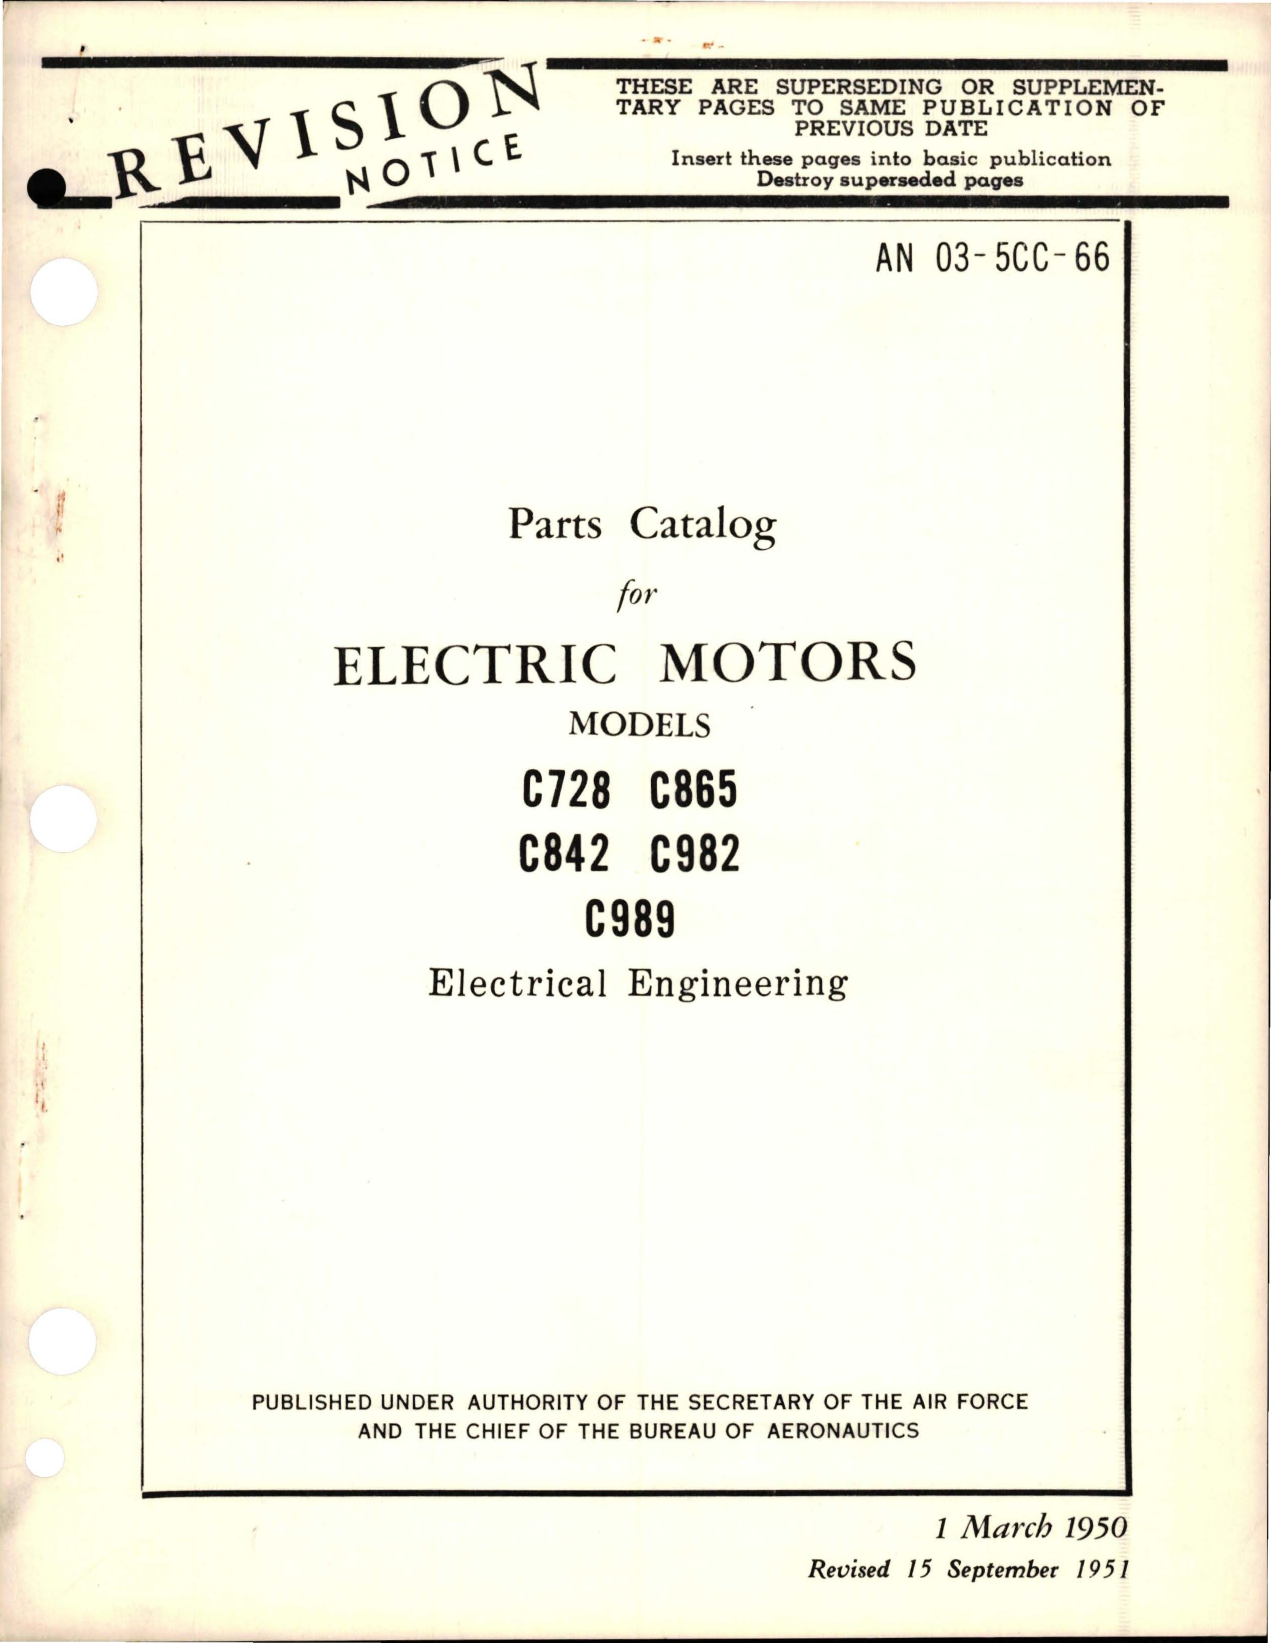 Sample page 1 from AirCorps Library document: Revision to Parts Catalog for Electric Motors - Models C728, C842, C865, C982, and C898